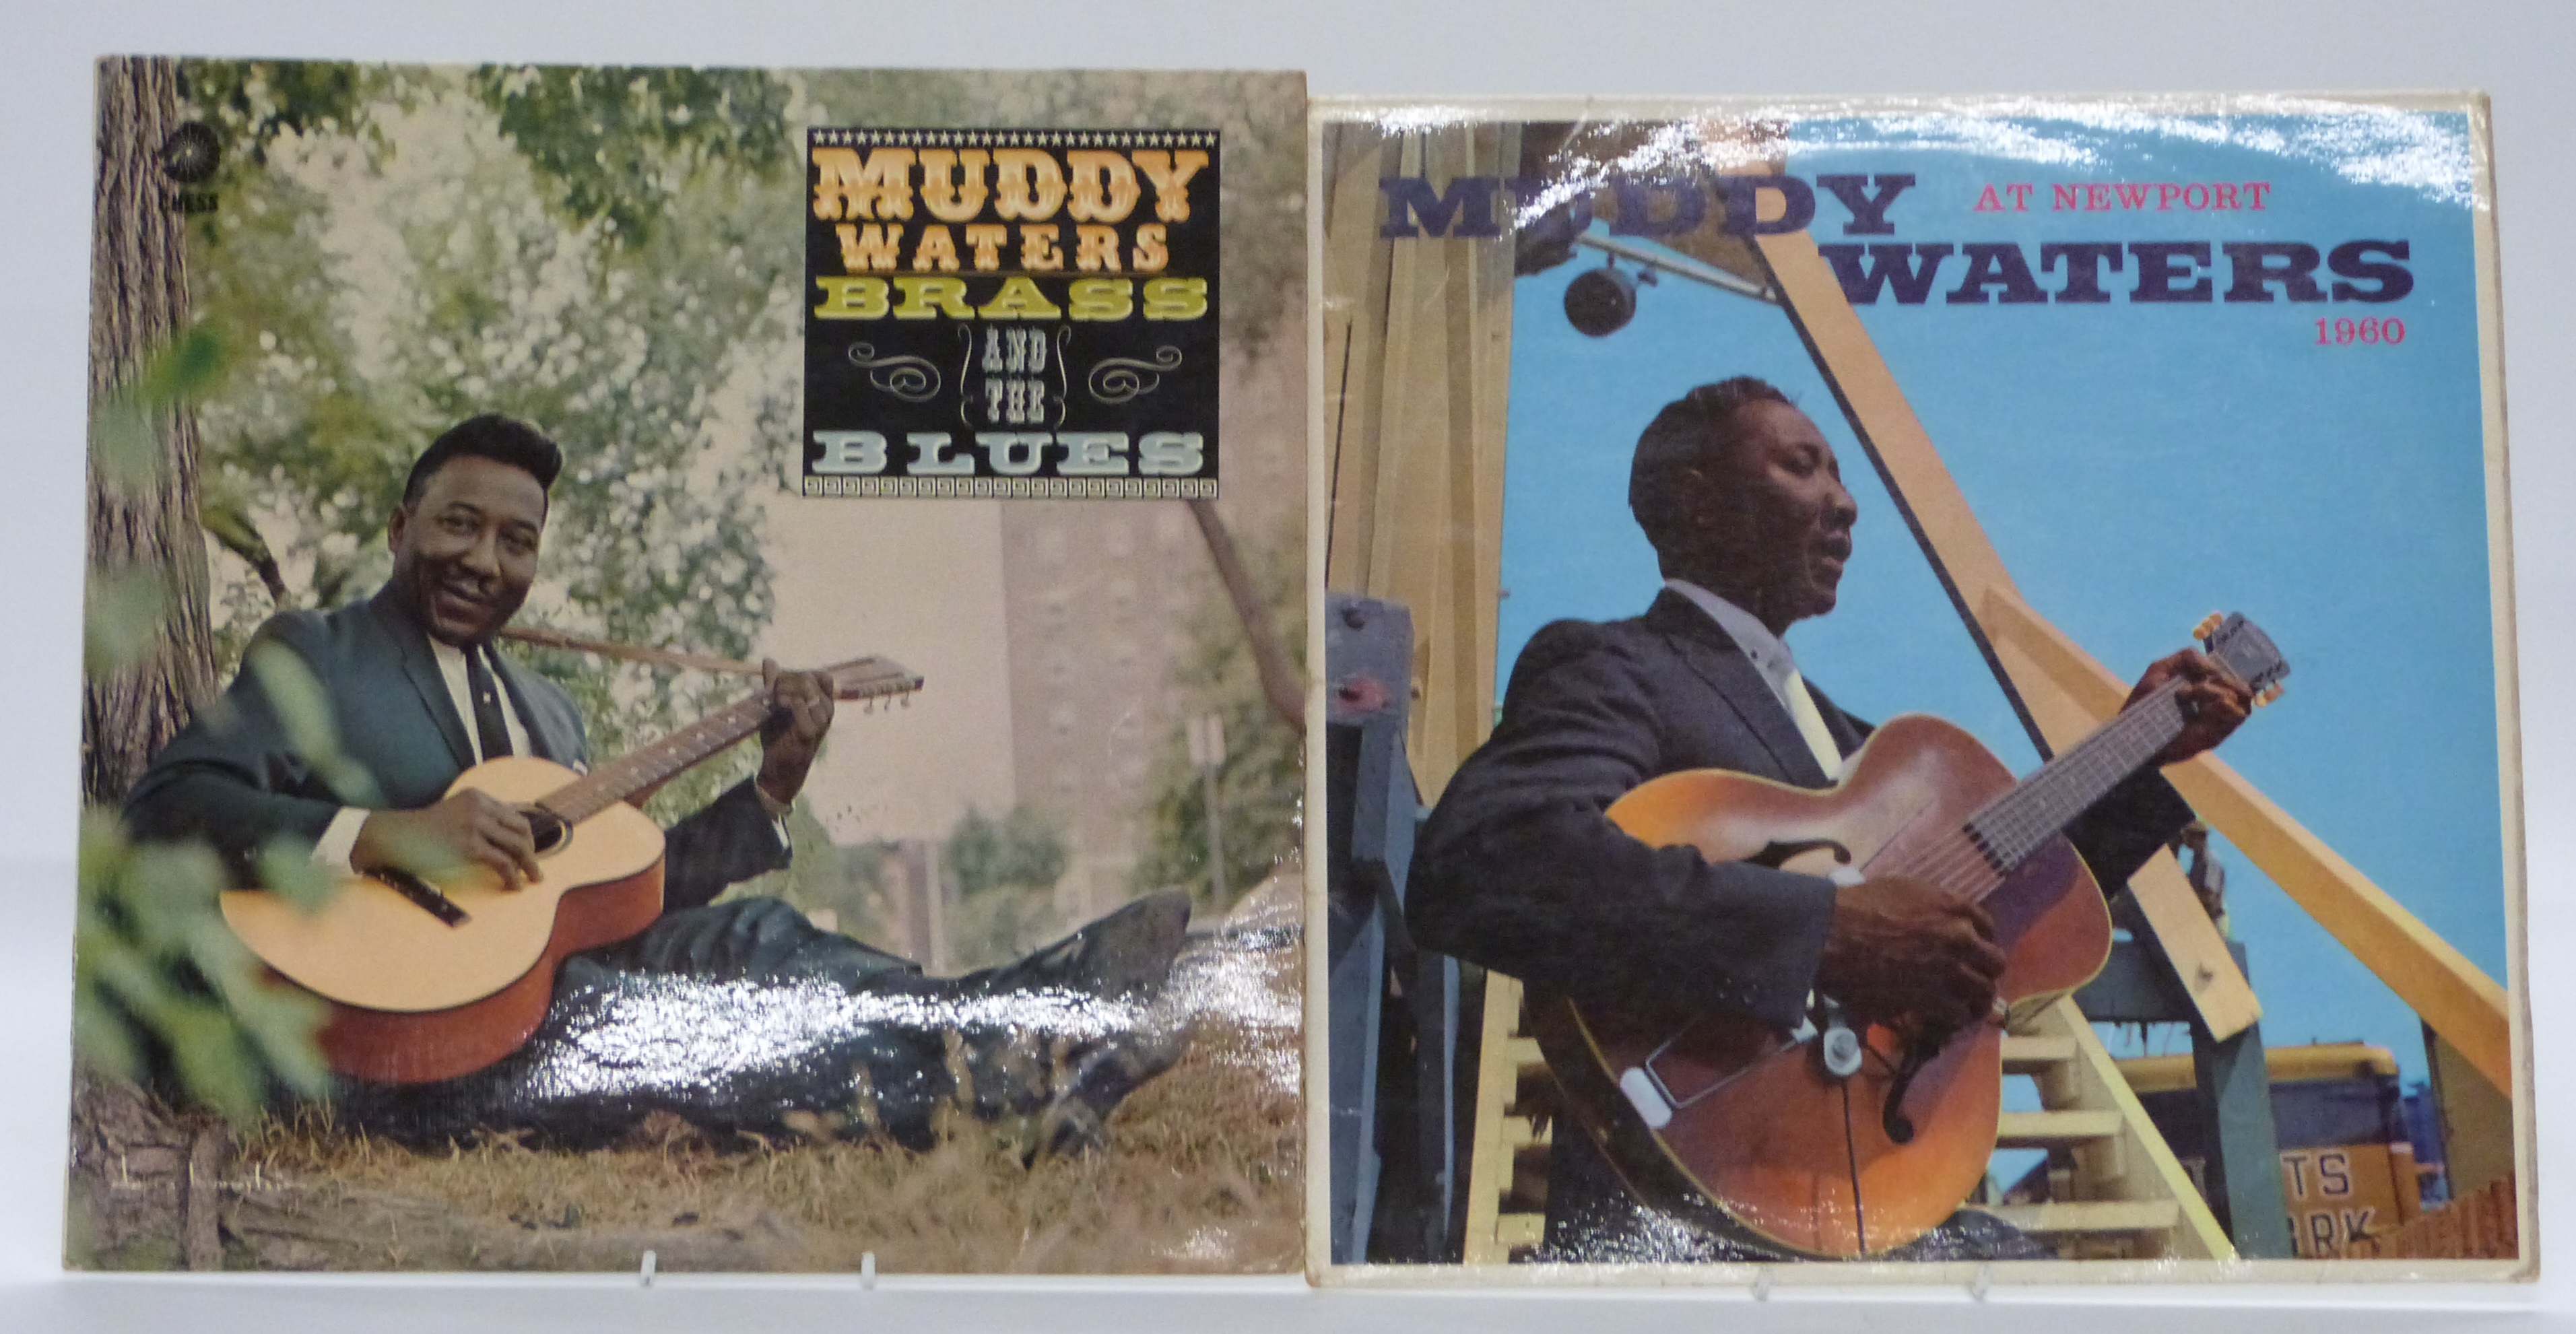 Muddy Waters - At Newport (CRL4513) and Muddy, Brass & The Blues (CRL4526) records appear at least